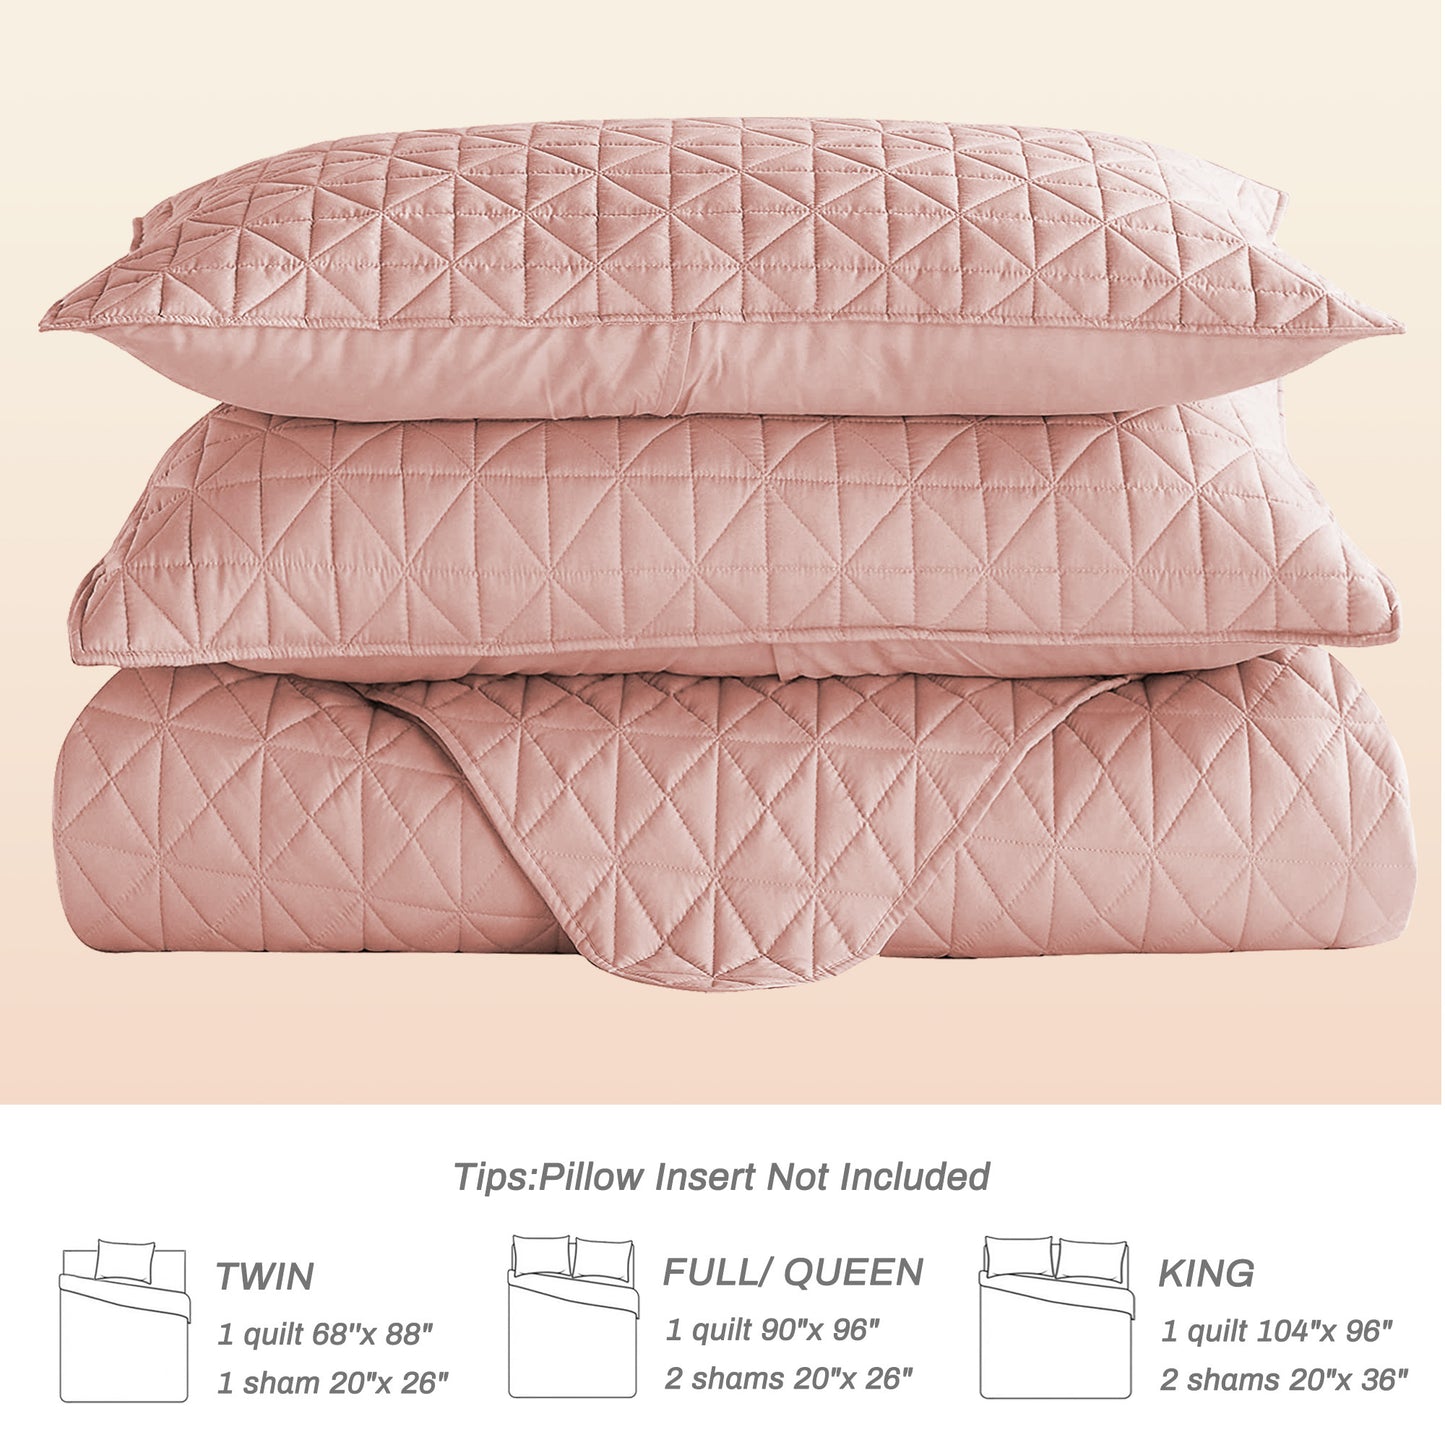 Exclusivo Mezcla Twin Quilt Bedding Set for All Seasons, Lightweight Soft Pink Quilts Twin Size Bedspreads Coverlets Bed Cover with Geometric Stitched Pattern, (1 Quilt, 1 Pillow Sham)